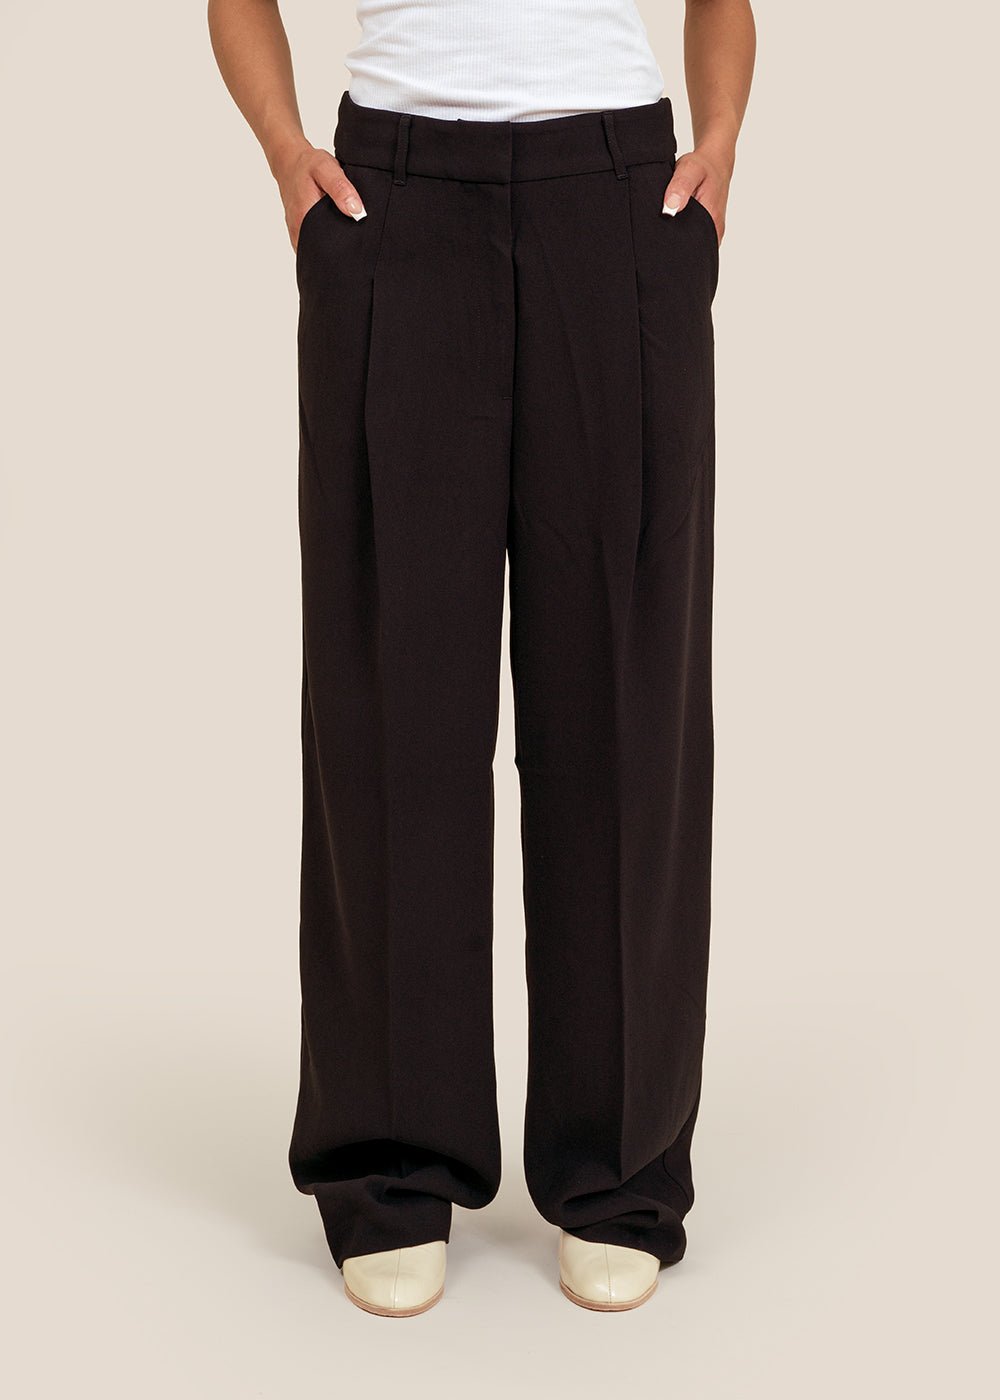 Brunella Trousers in Black by STYLEIN – New Classics Studios